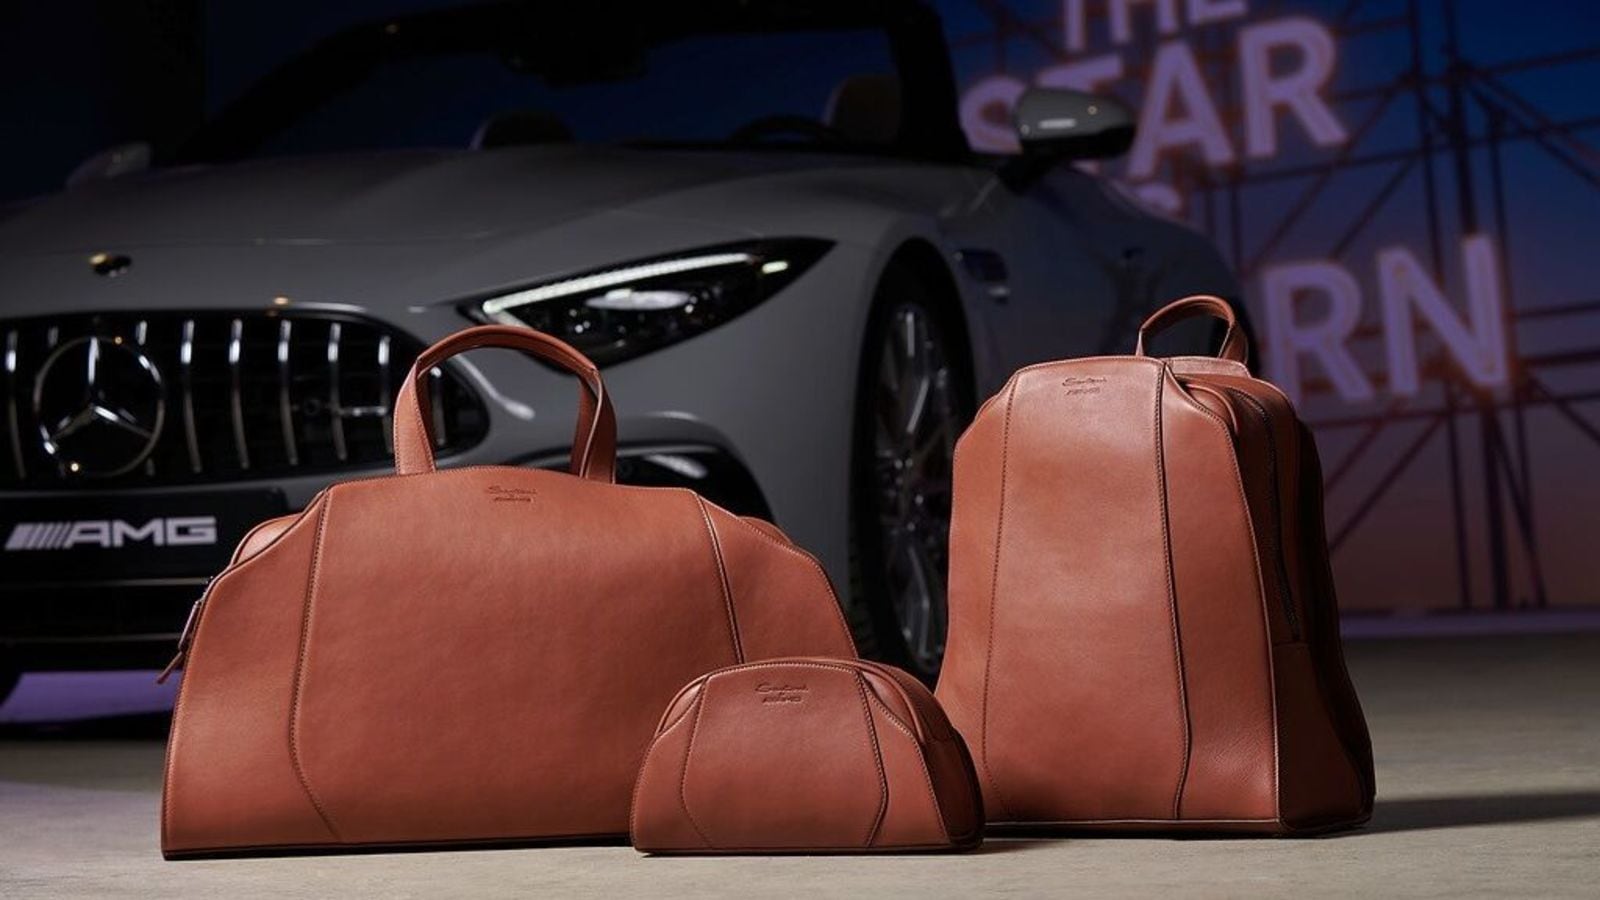 2022 Mercedes-AMG SL will come with customised luggage collection | HT Auto